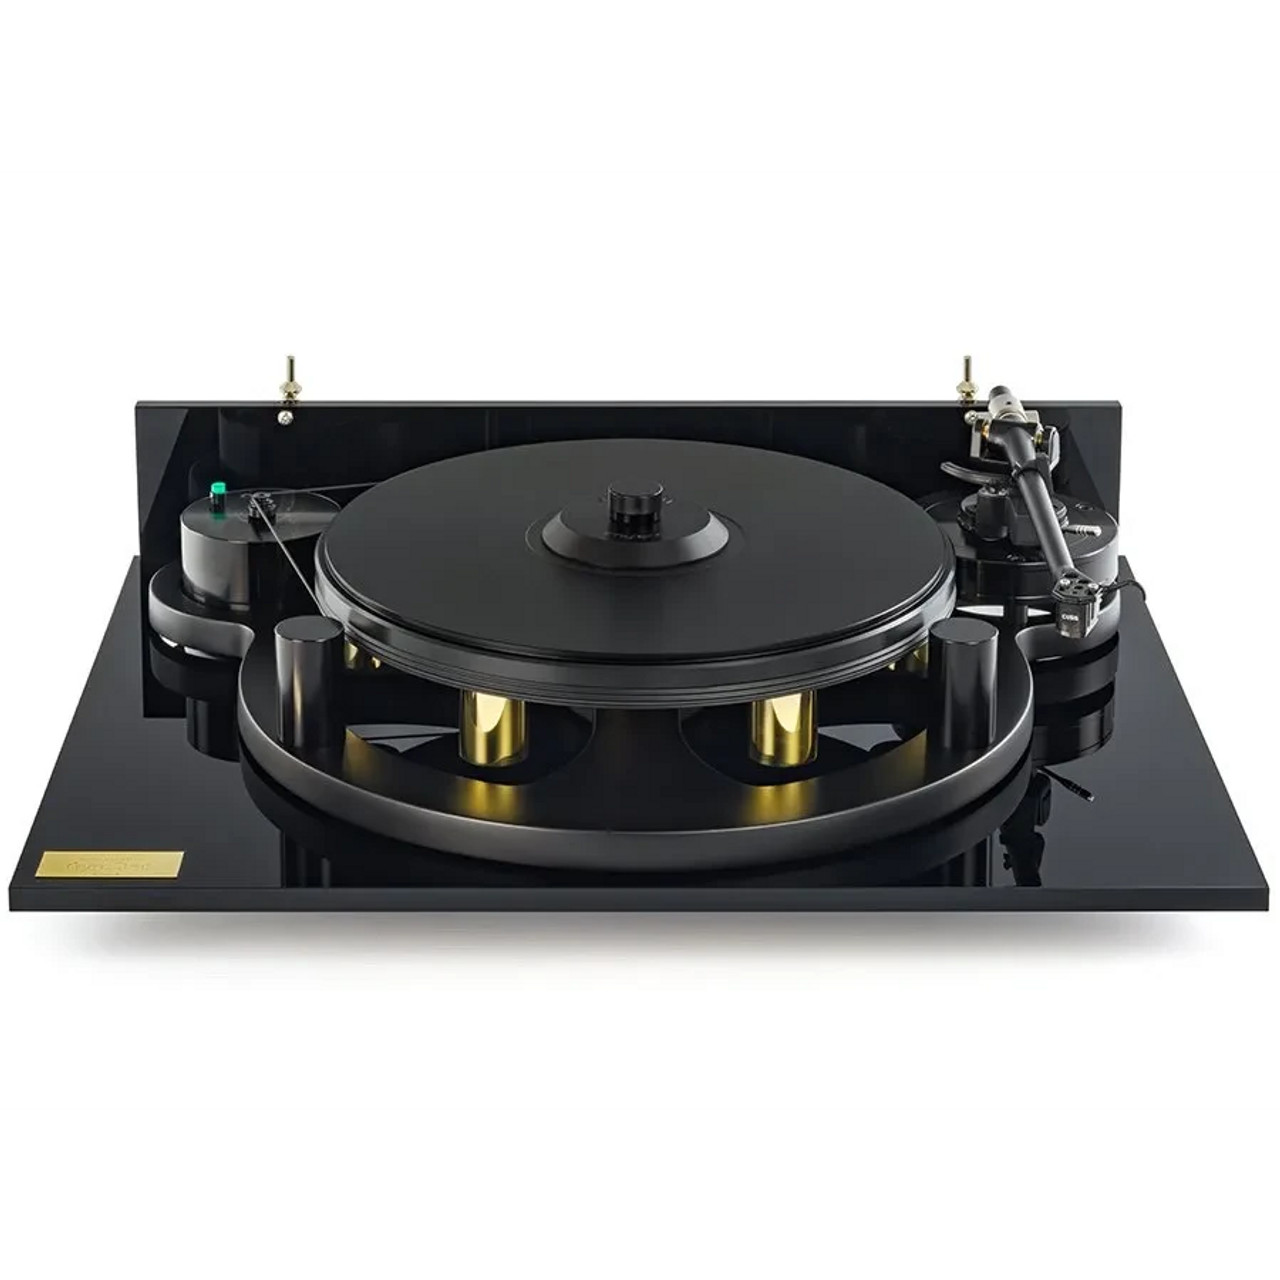 Michell Gyrodec turntable